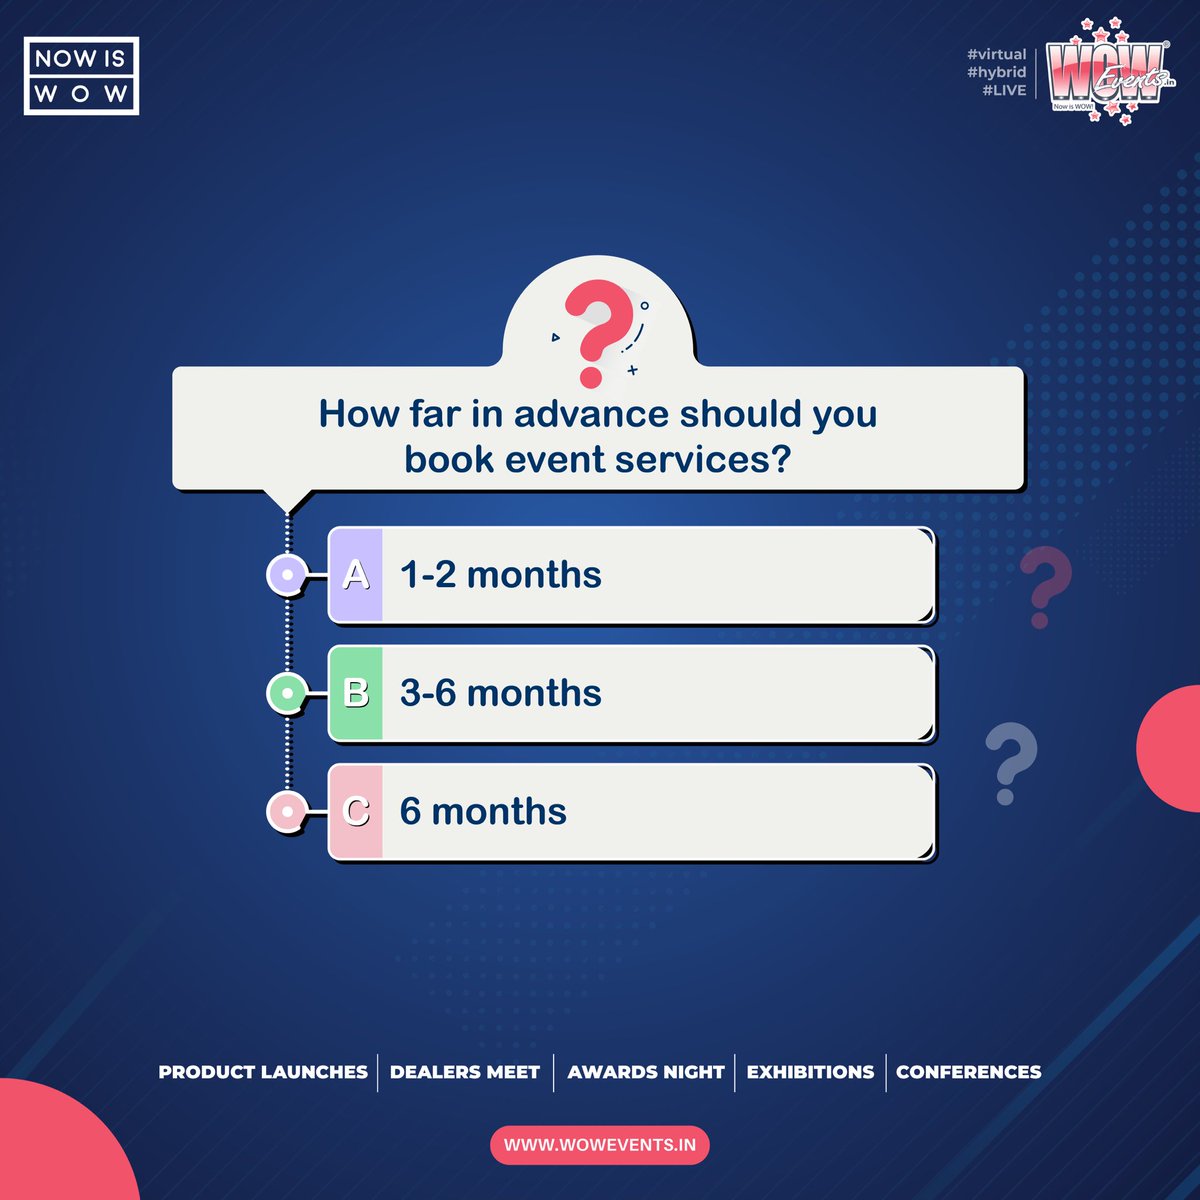 Plan ahead for a seamless event experience. Tell us in the comments, how far in advance do you book event services?

#WOWEvents #NOWISWOW #eventprofs #eventtimeline #eventplanning #planning #ParticipativeEvents #EventInspiration #EventIndustry #96hrs #ShahRukhKhan𓀠